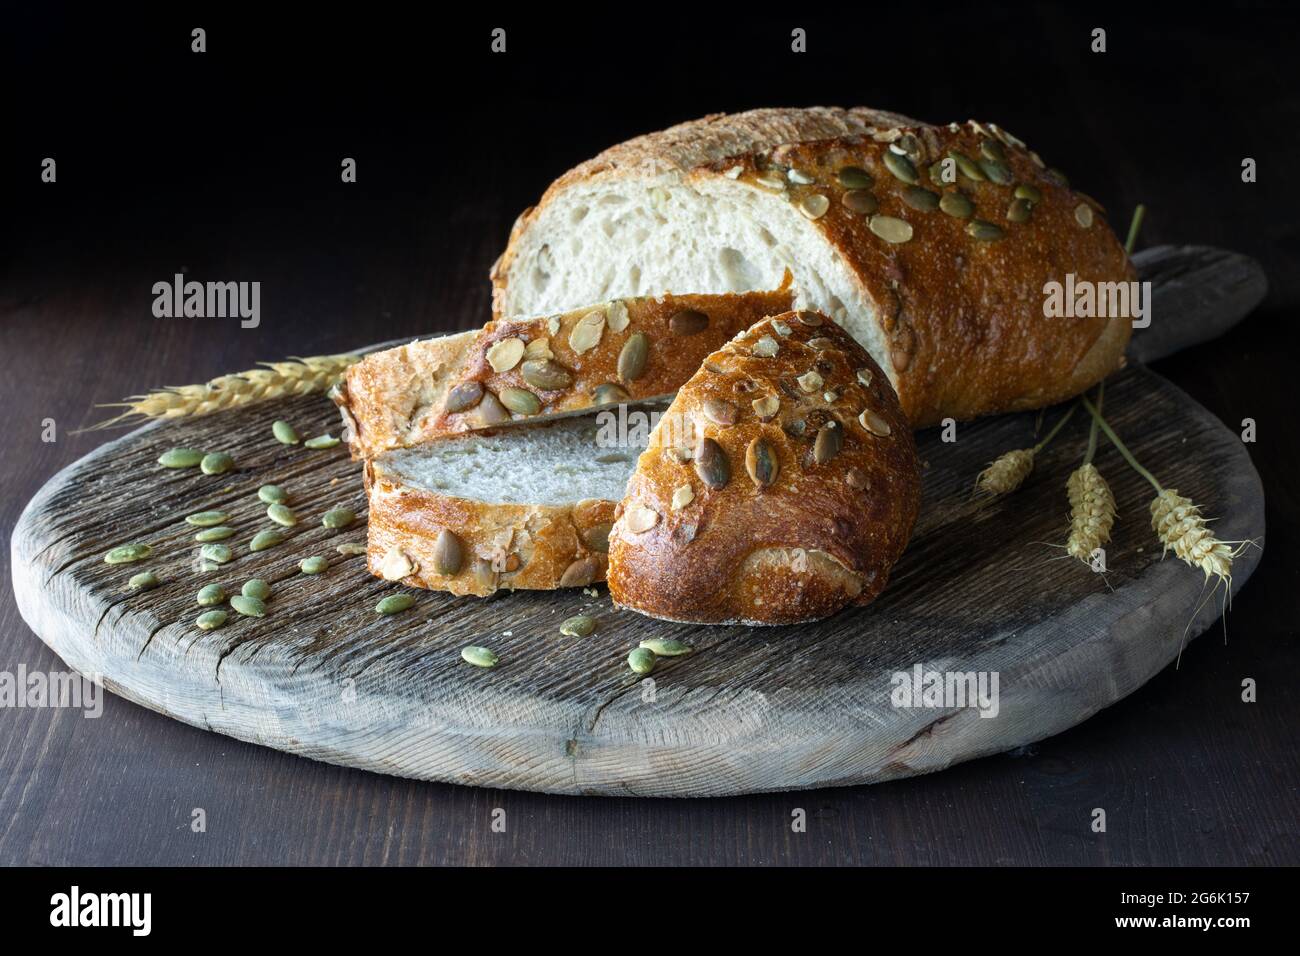 Sliced pumpkin seed bread on a rustic wooden board against a dark background. Stock Photo